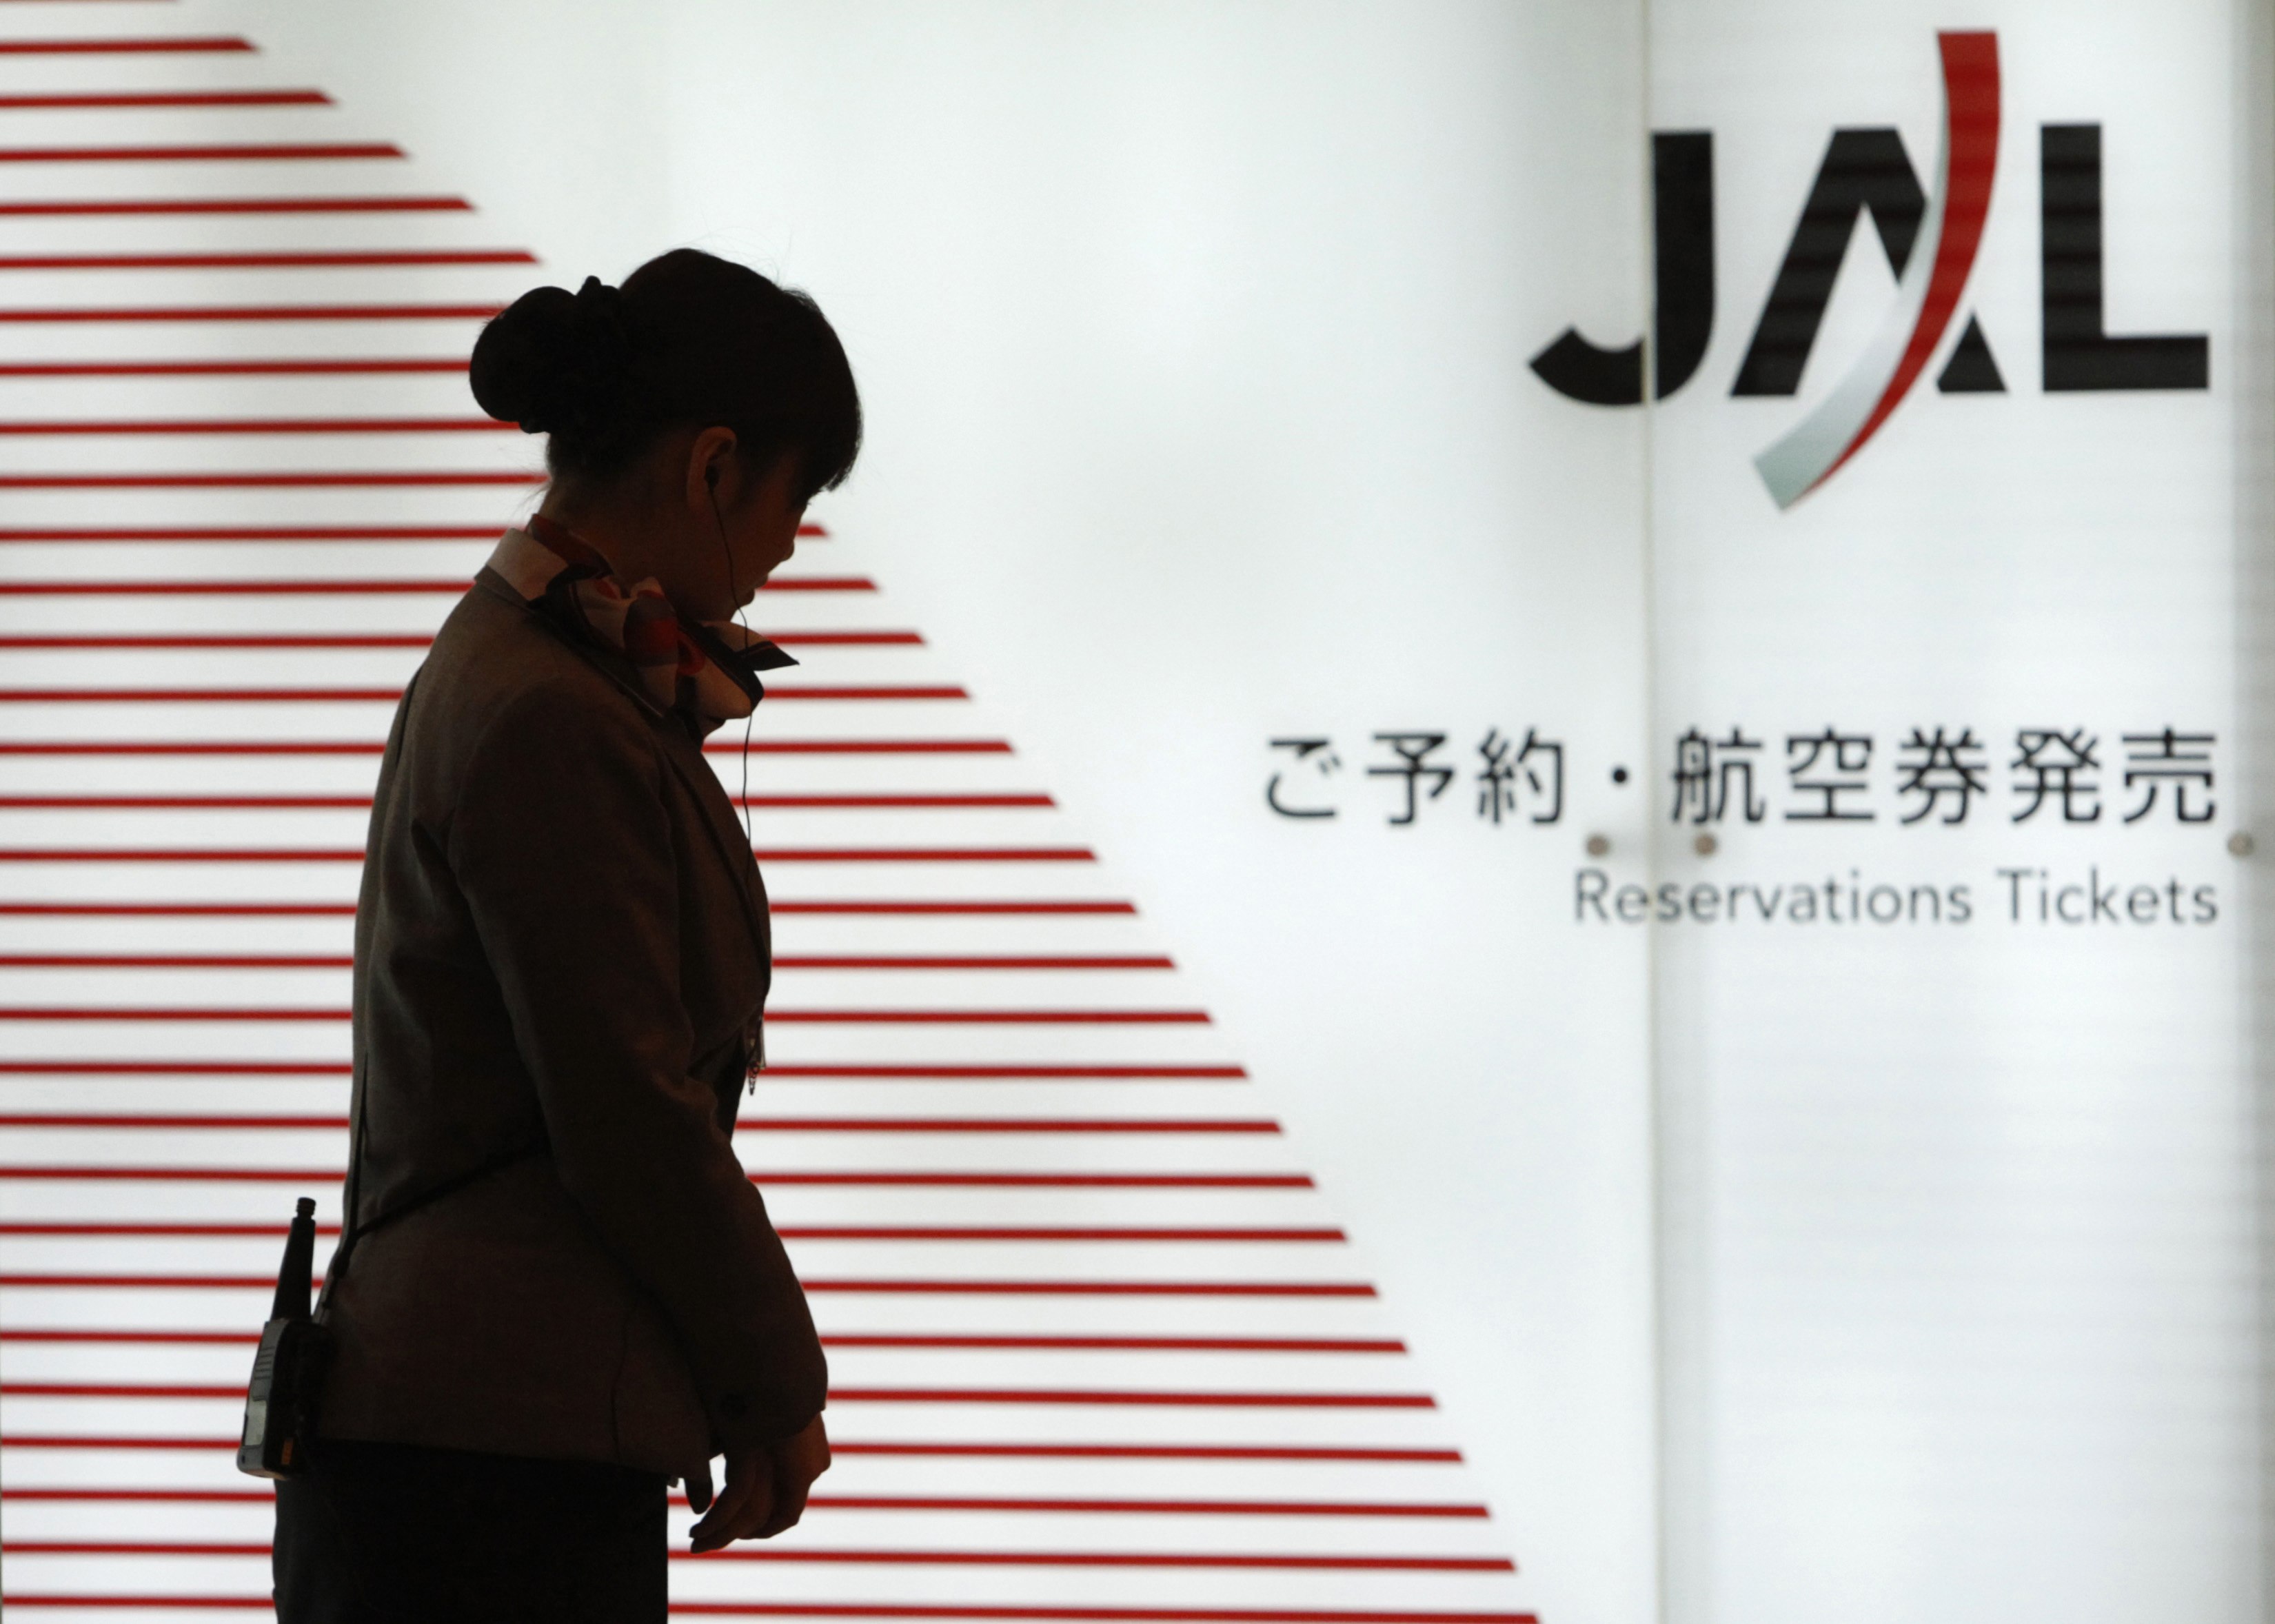 Japan Airlines files for bankruptcy protection, to be delisted next month